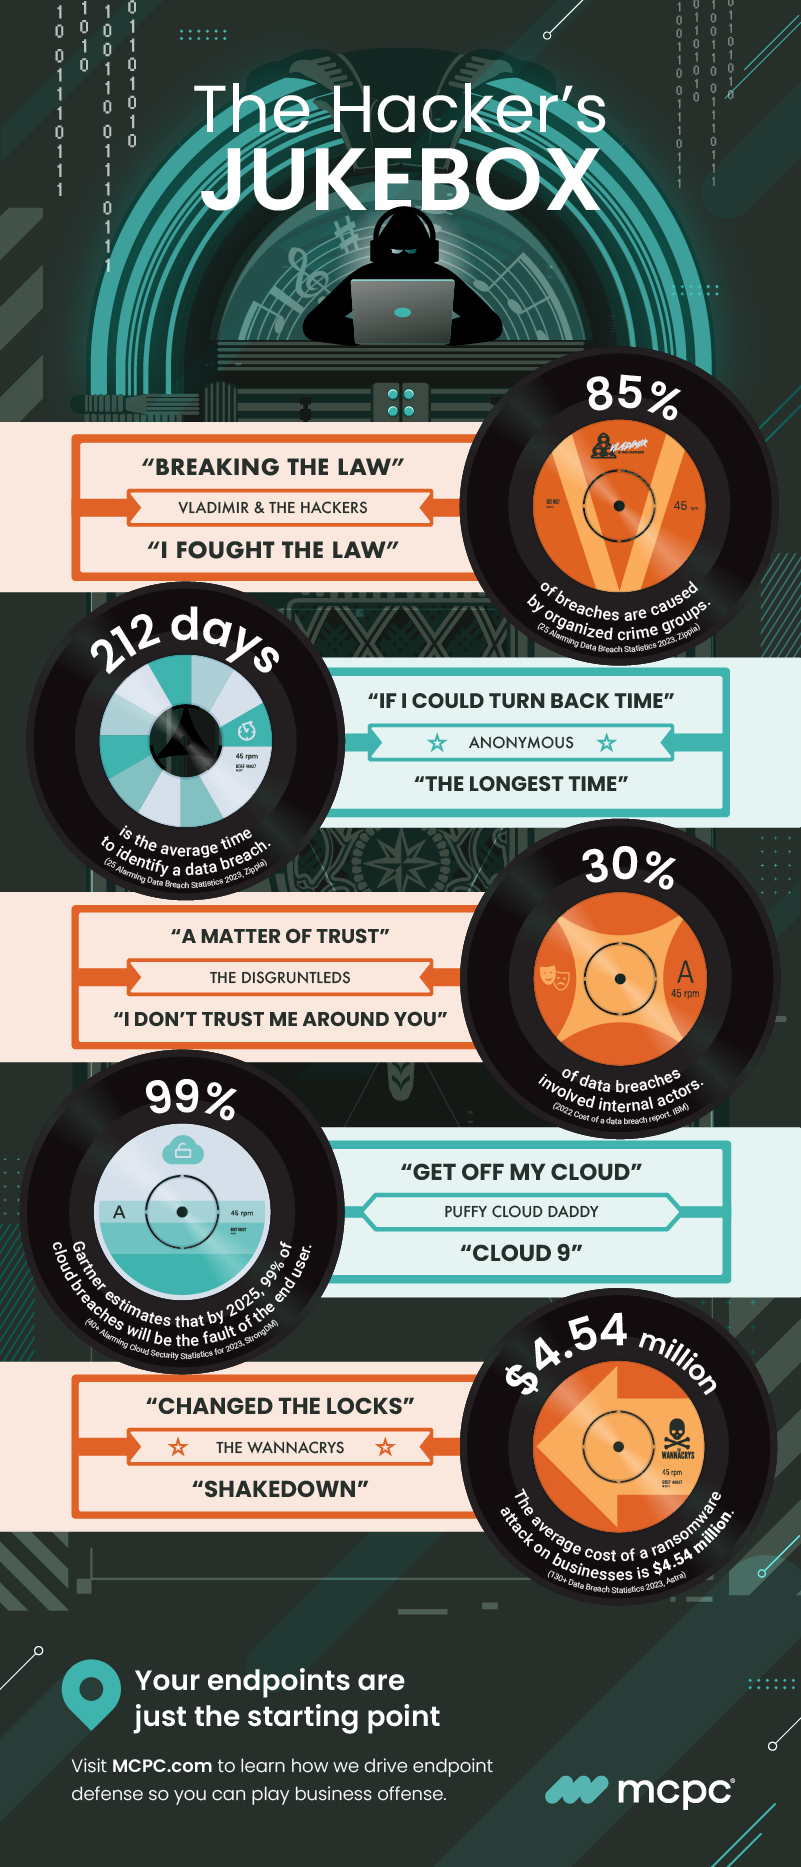 Infographic entitled The Hacker's Jukebox provides some statistics on cybercrime.